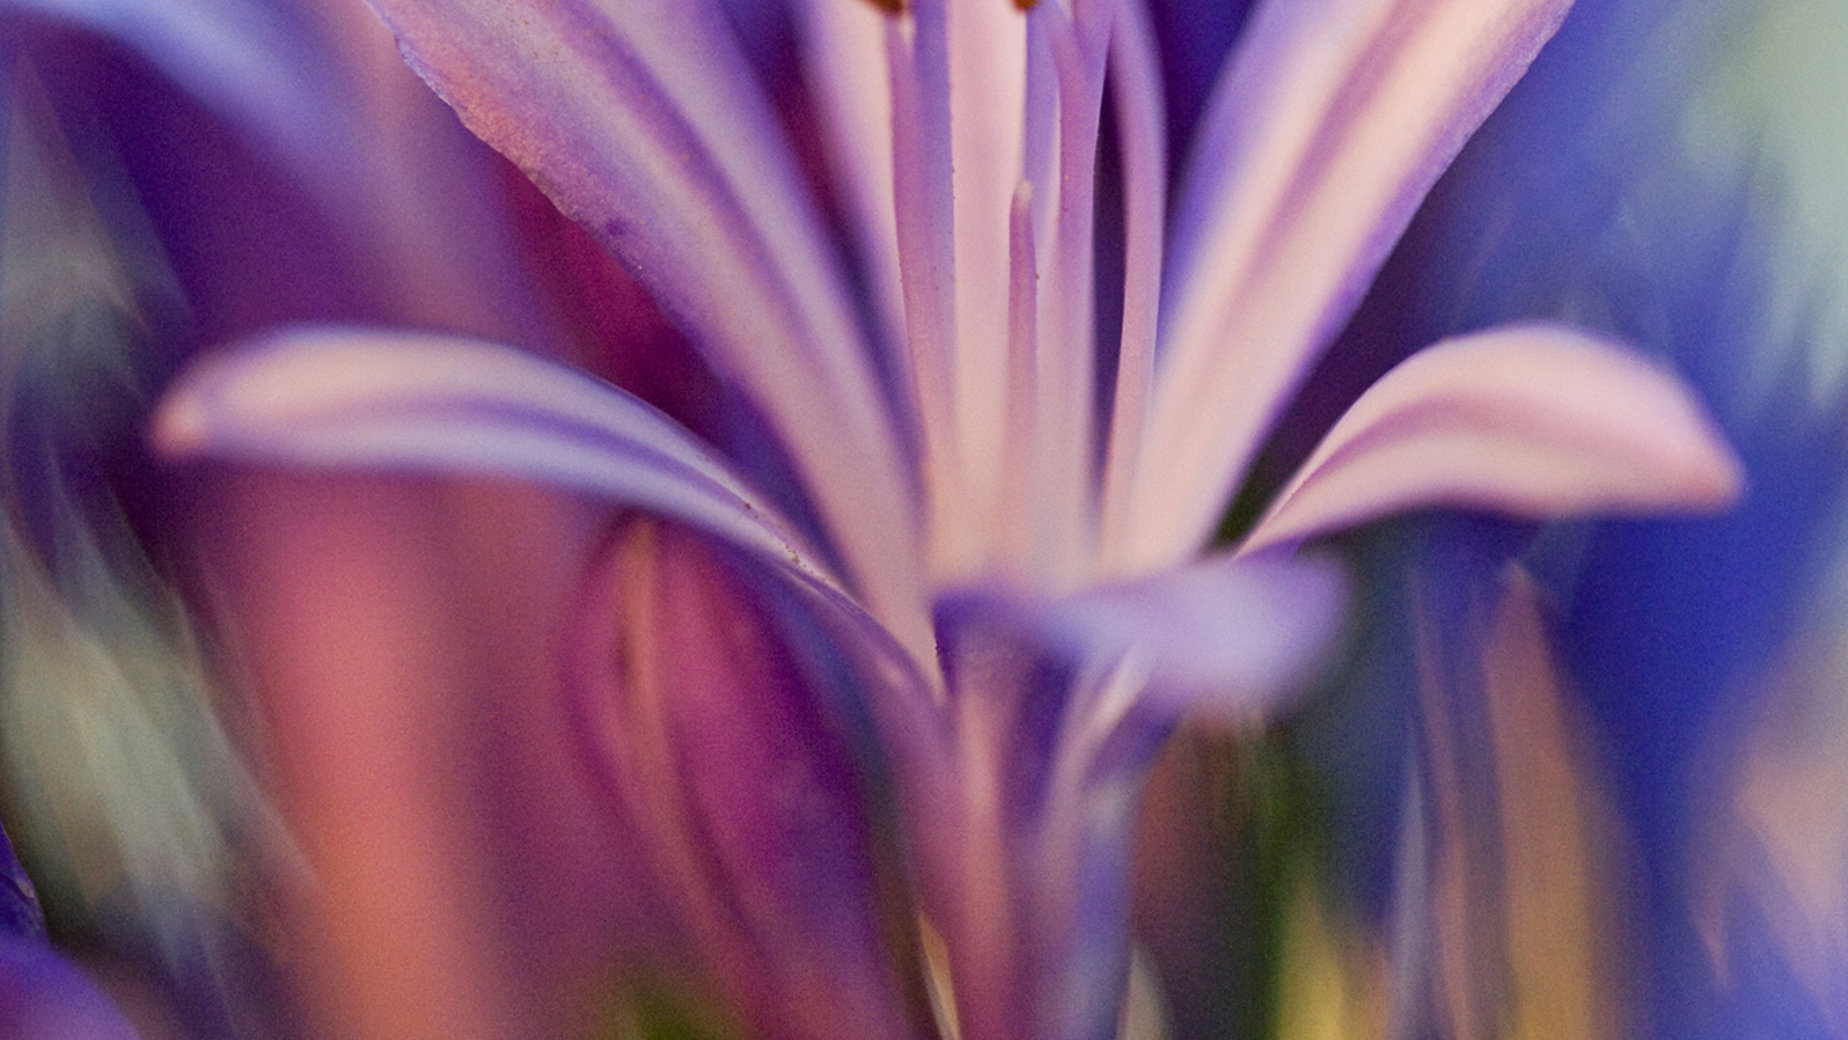 Agapanthus by Marilyn Gillespie